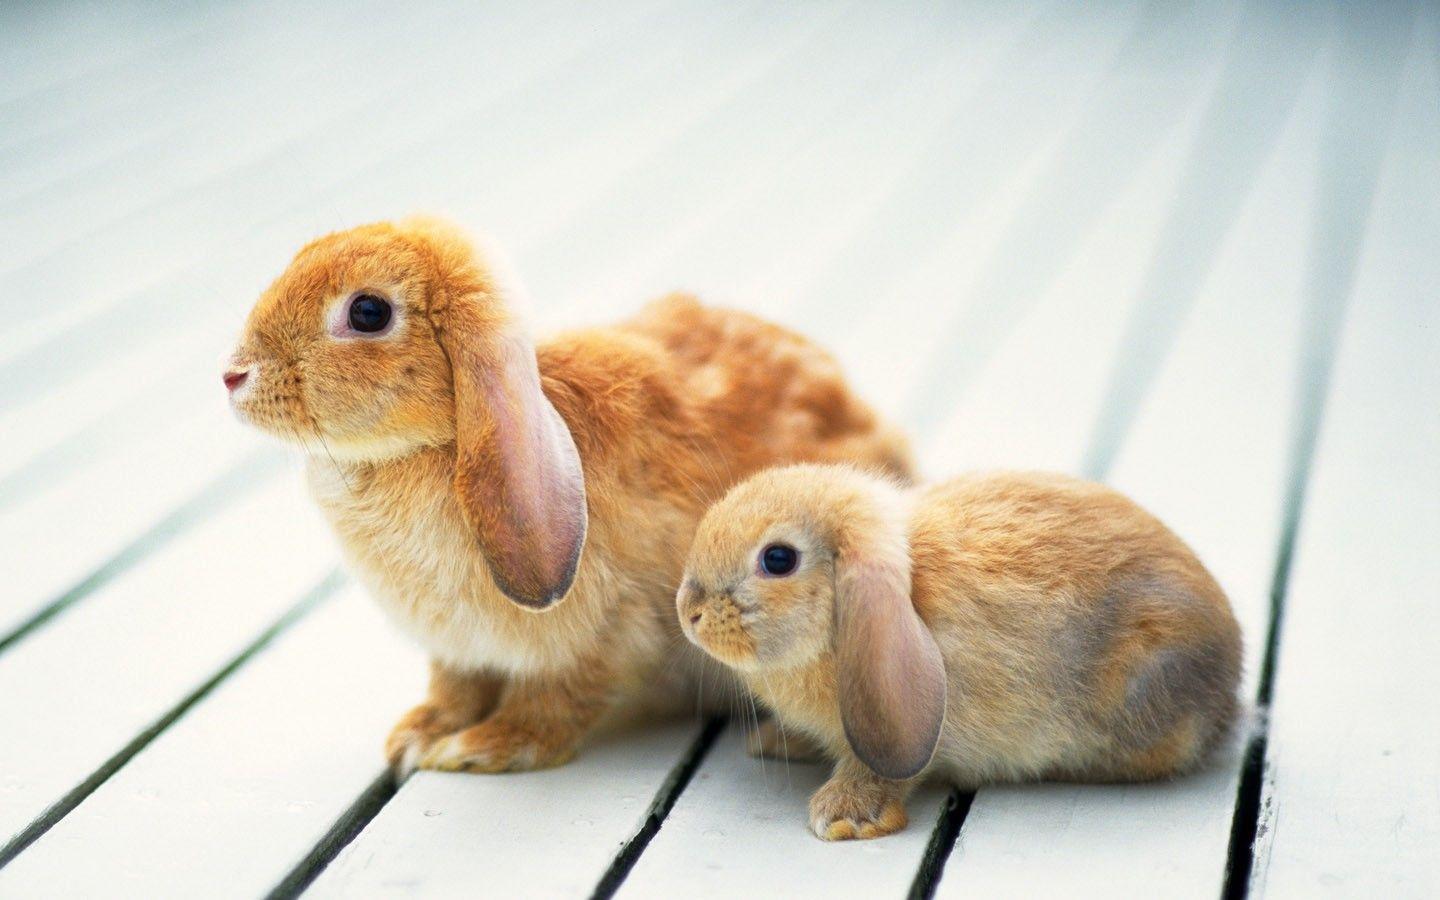 Cute Bunny Wallpaper Image & Picture